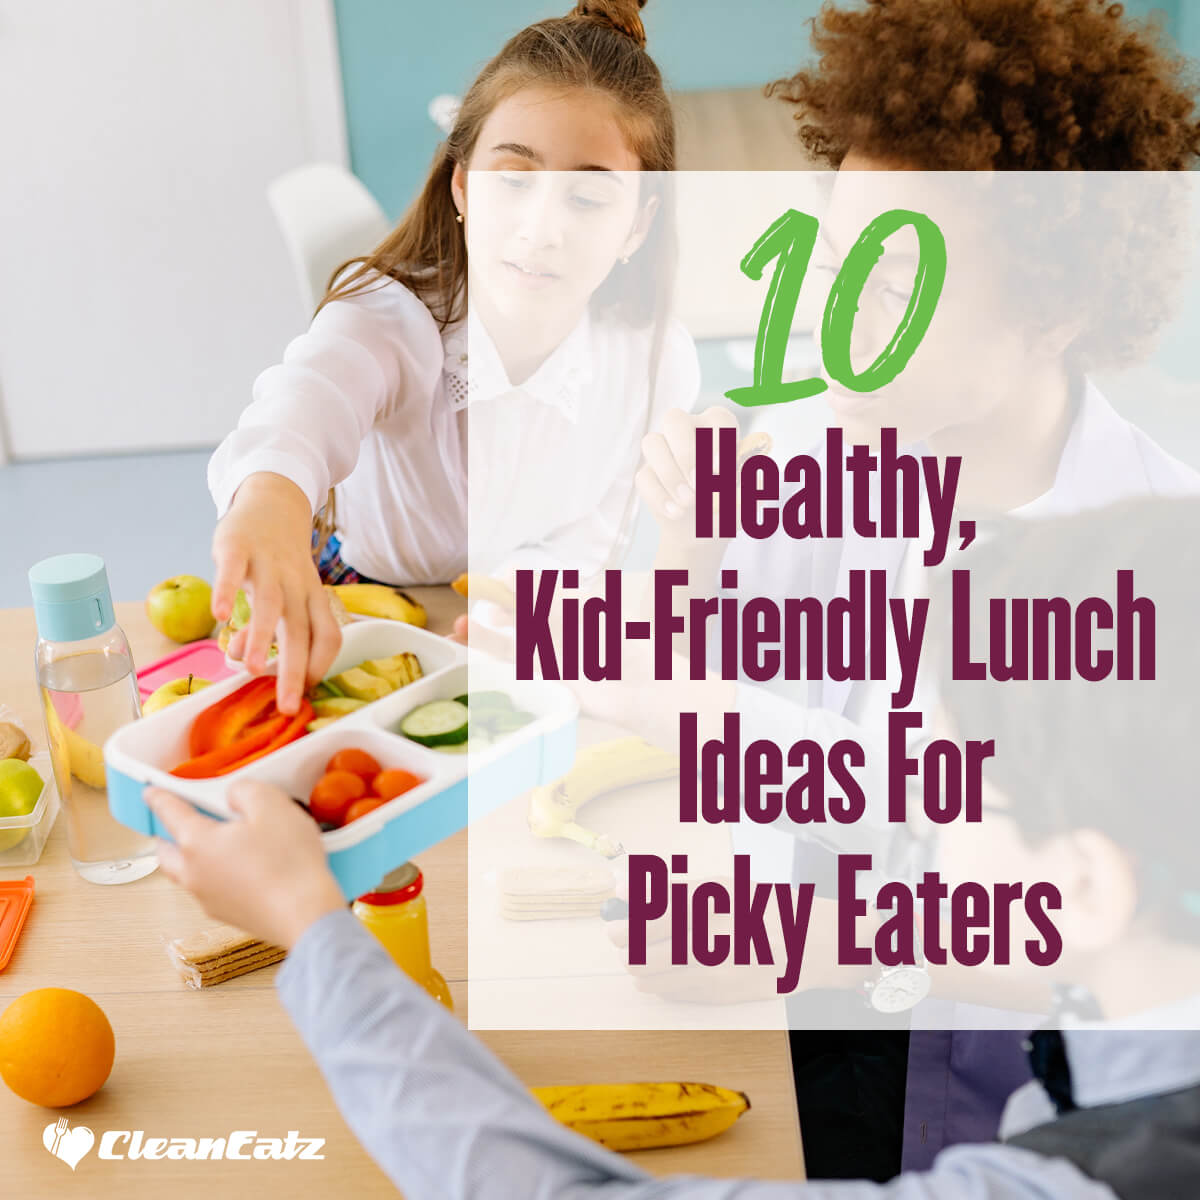 Healthy Kids Meal Delivery for Picky Eaters